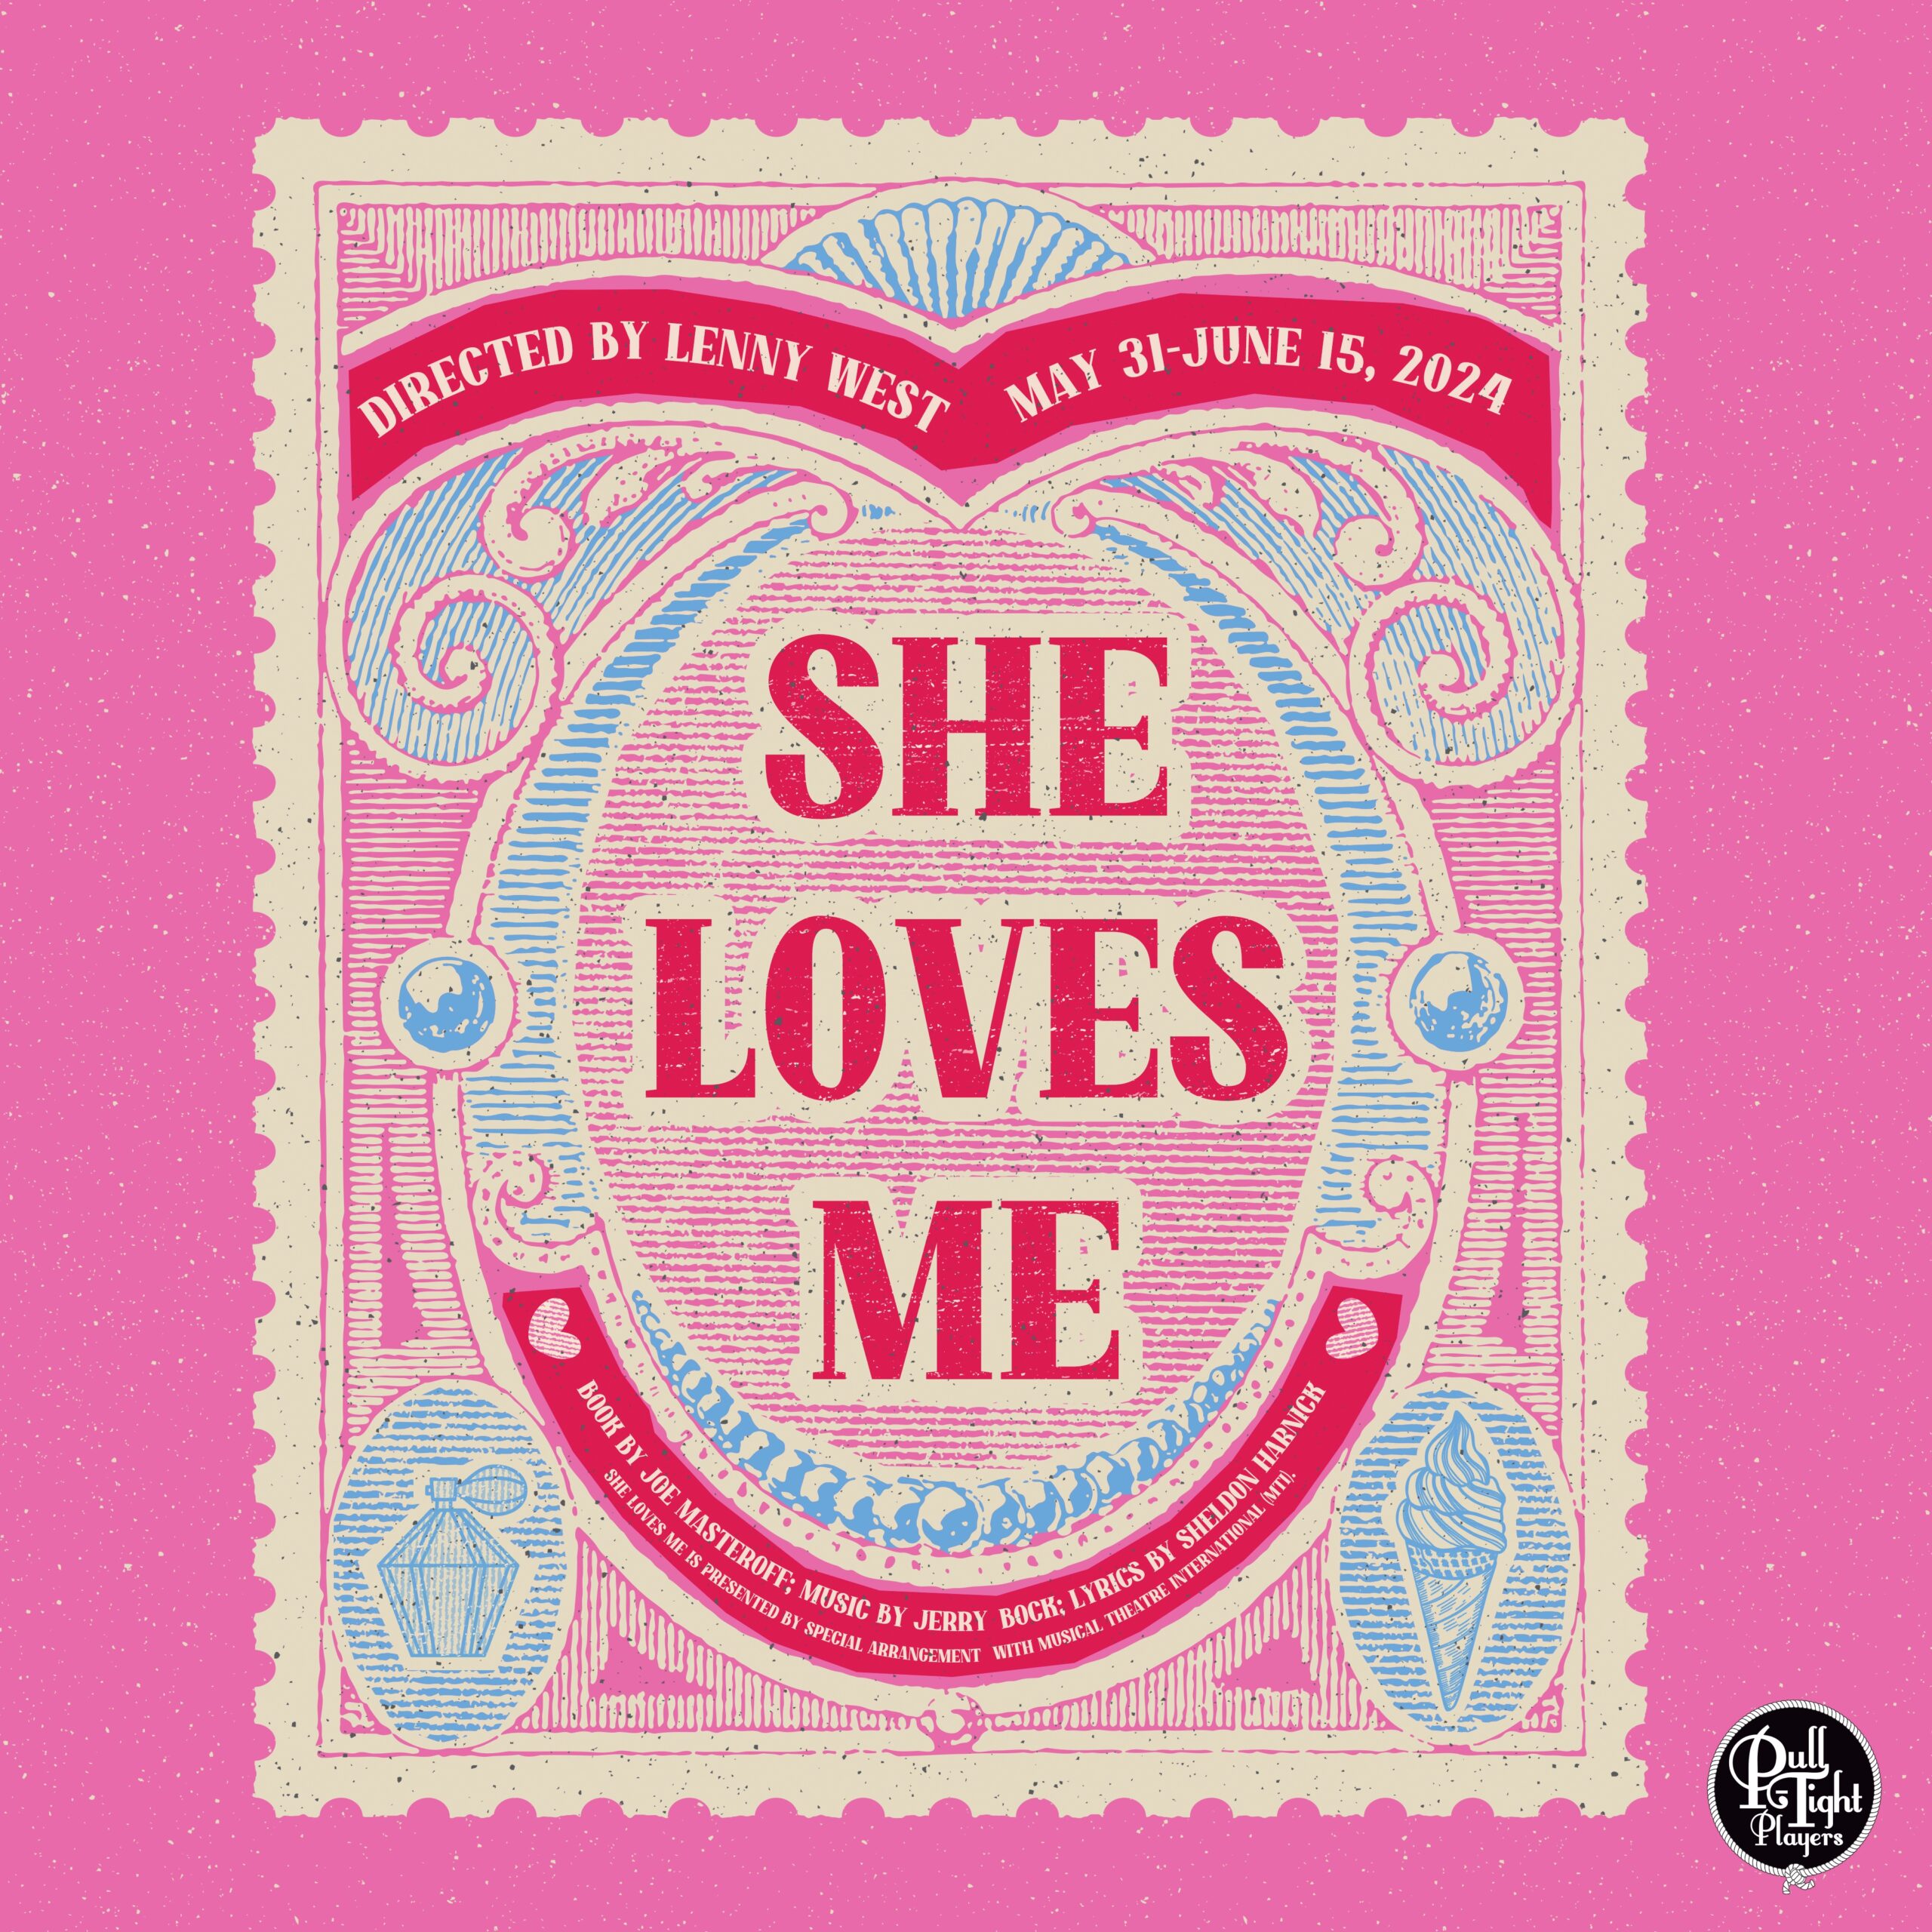 Pull-Tight-Players 2024 Season Downtown Franklin Theatre Events, She Loves Me.